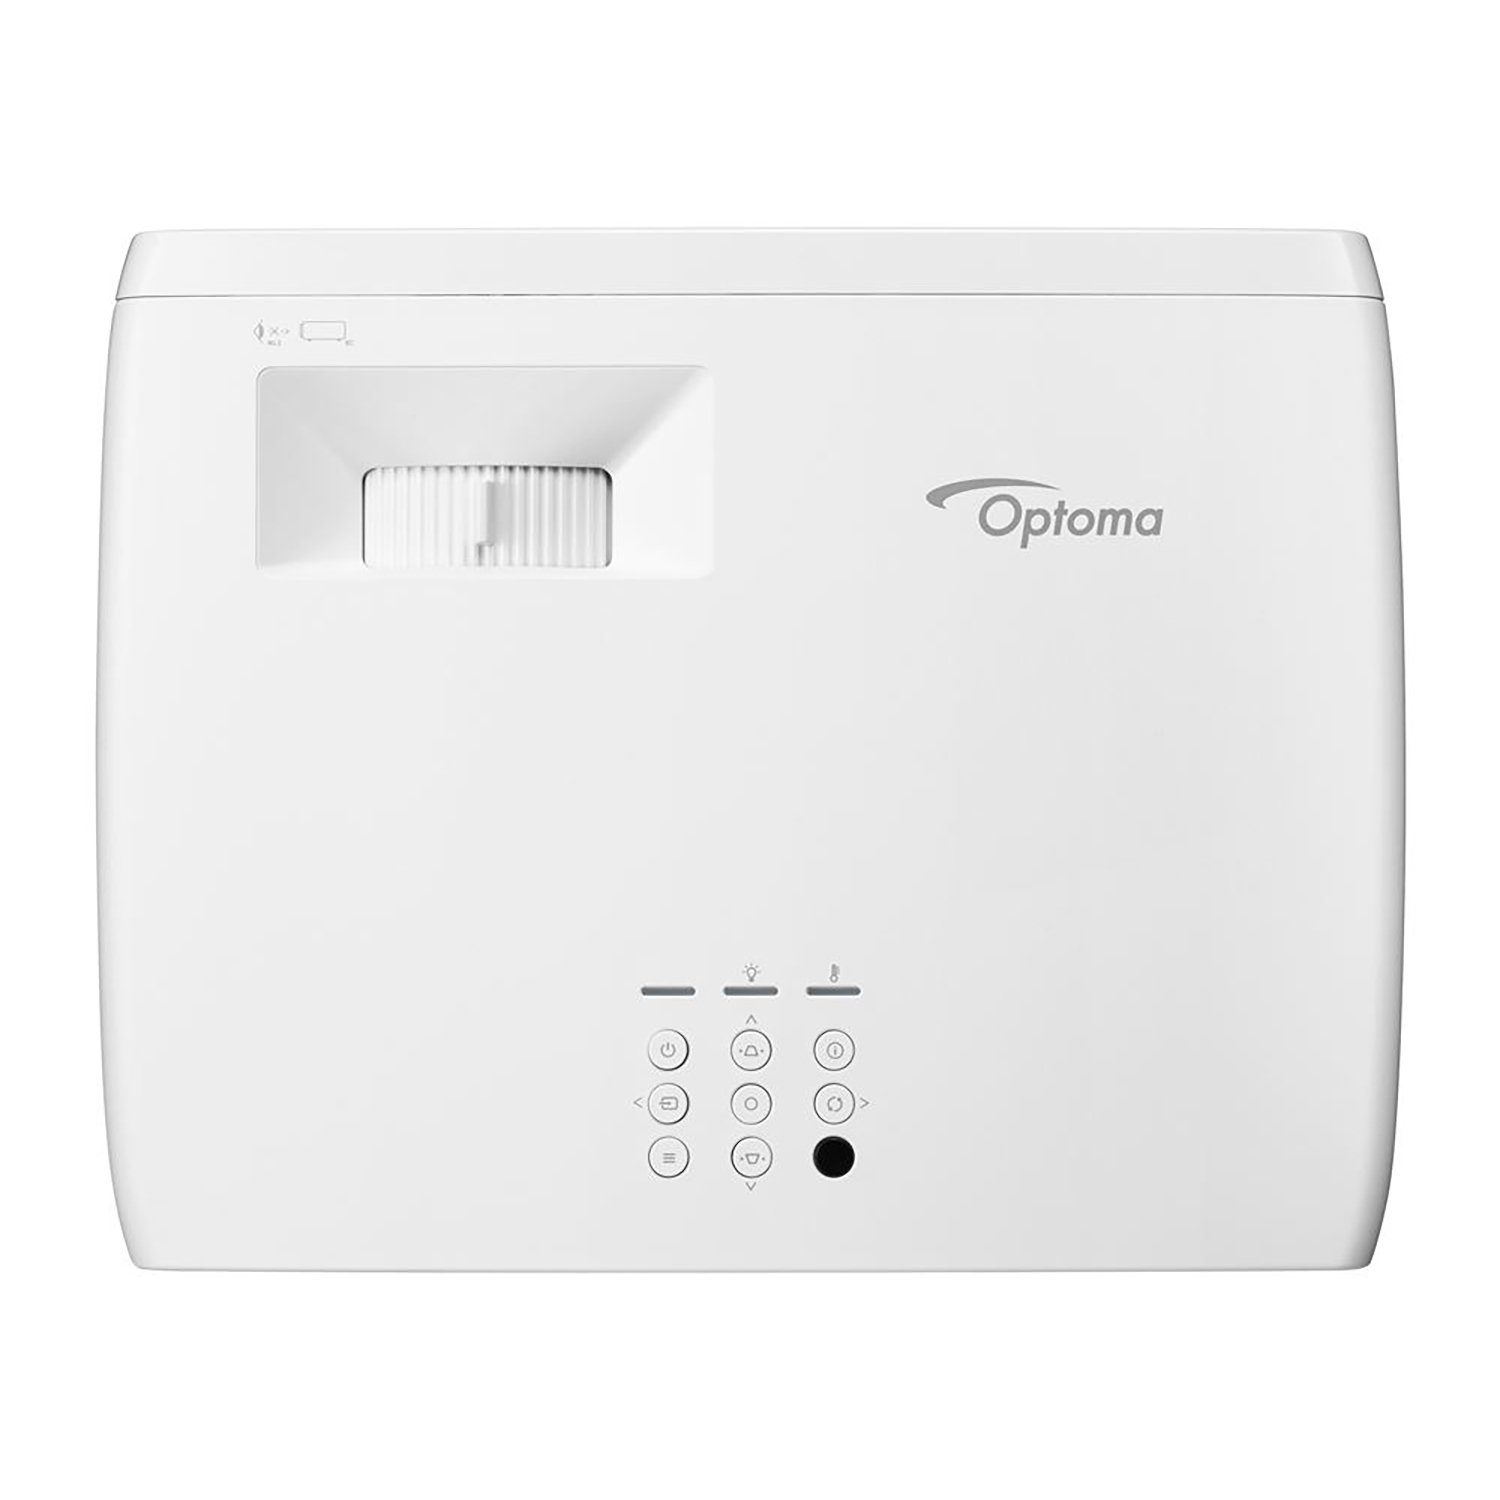 Optoma GT2100HDR x 1920 (4200 1080 3D-Beamer lm, 2000000:1, px)